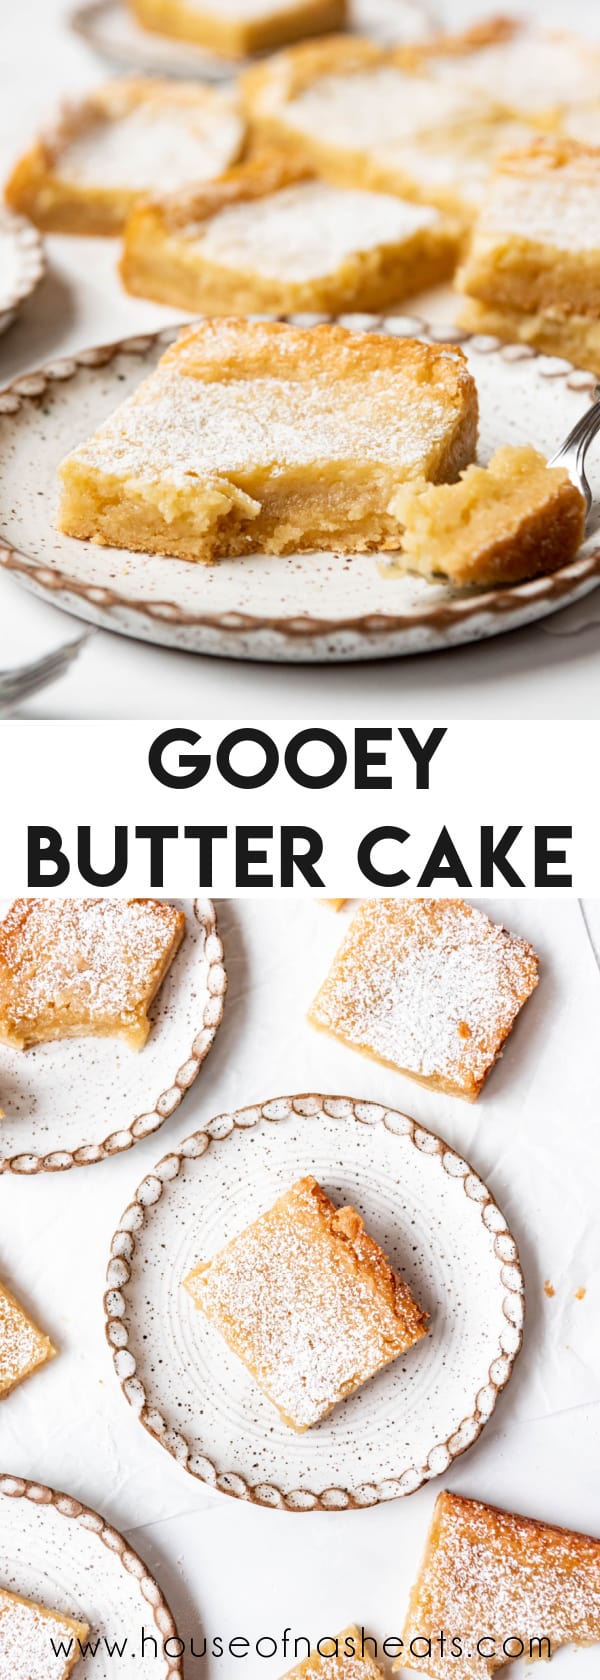 A collage of images of gooey butter cake with text overlay.